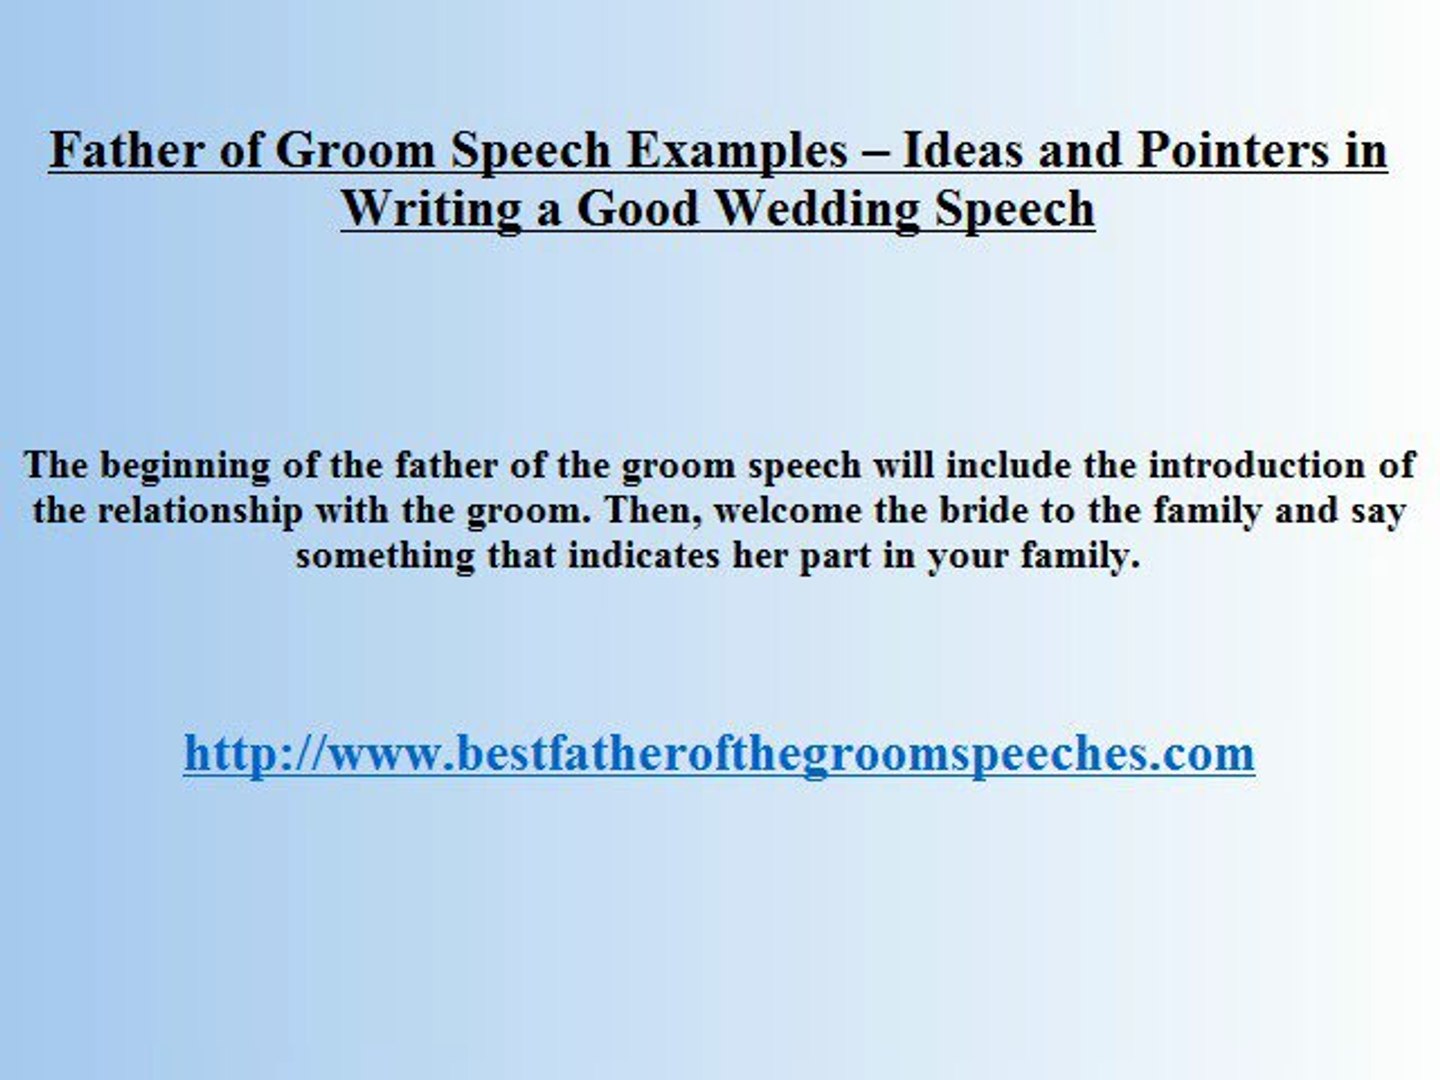 father of the groom speech examples uk